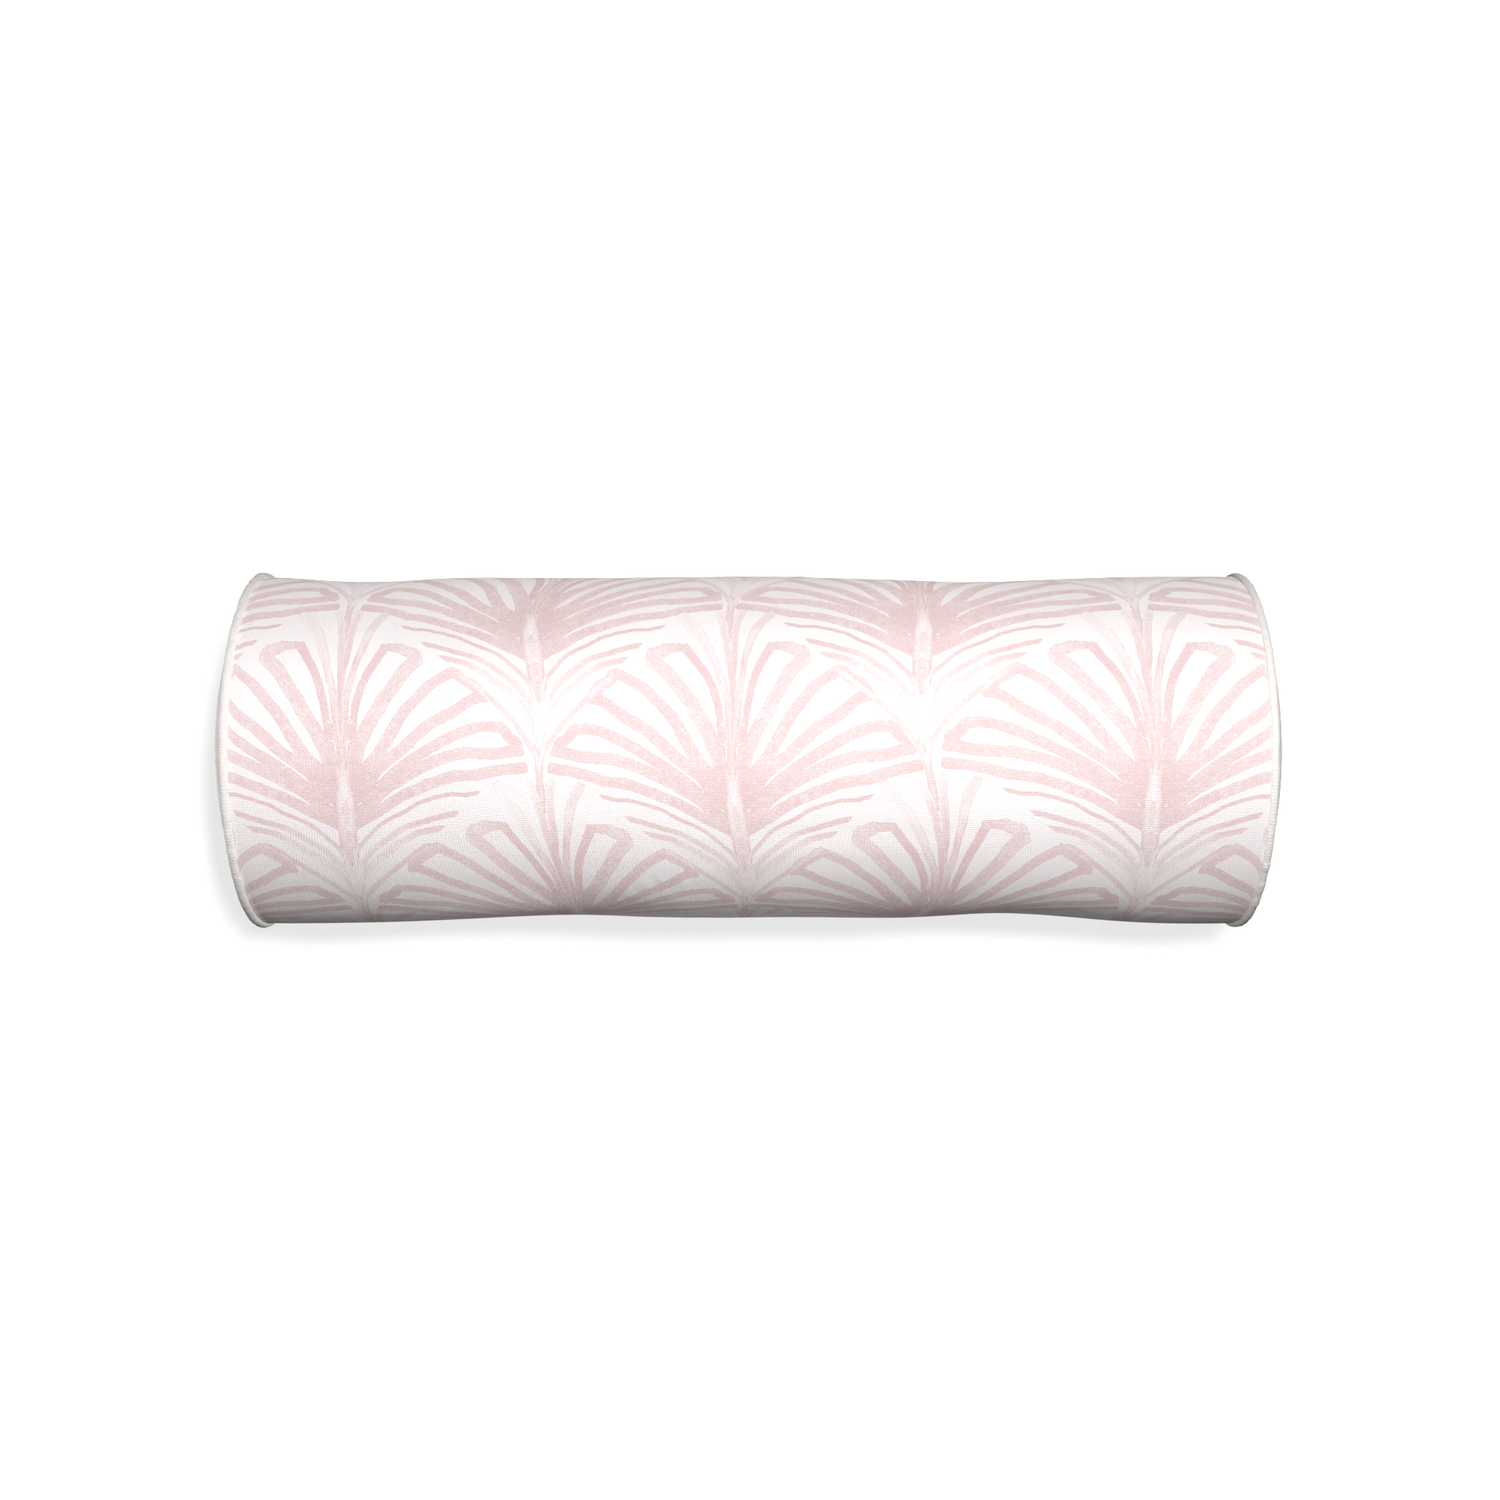 Bolster suzy rose custom rose pink palmpillow with snow piping on white background